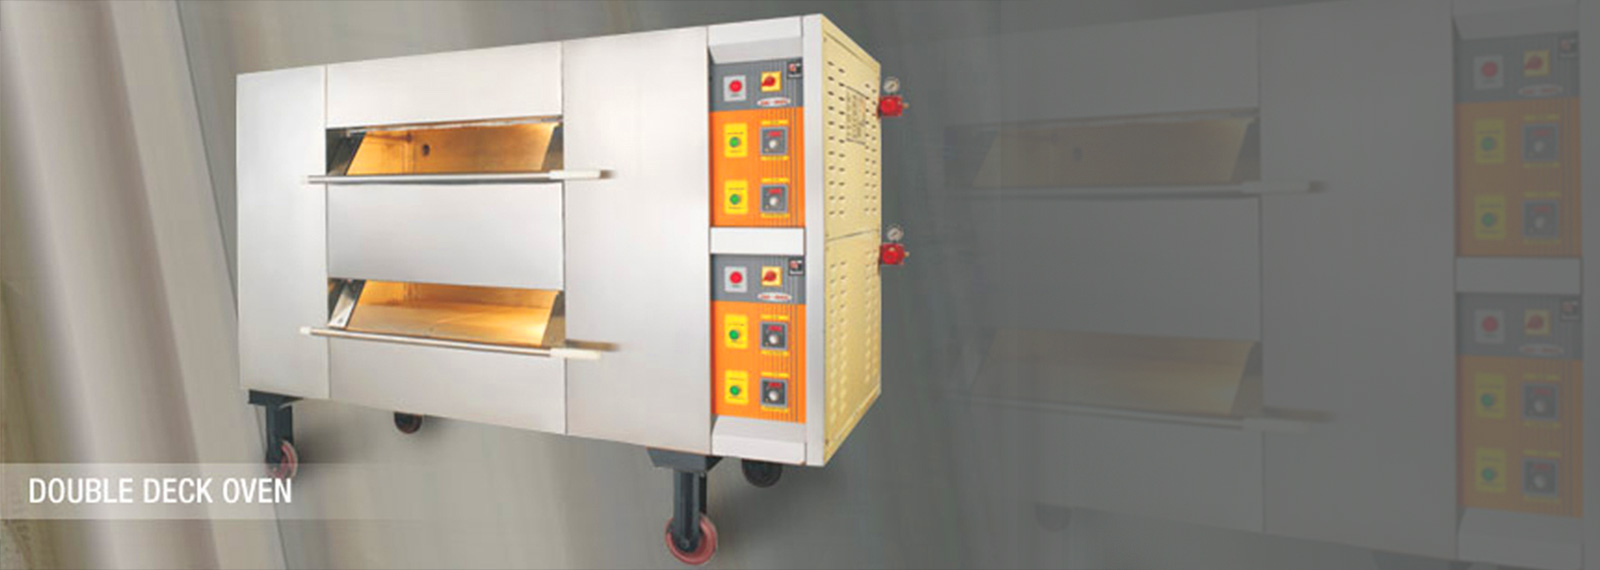 Bakery Oven Manufacturers in Kerala